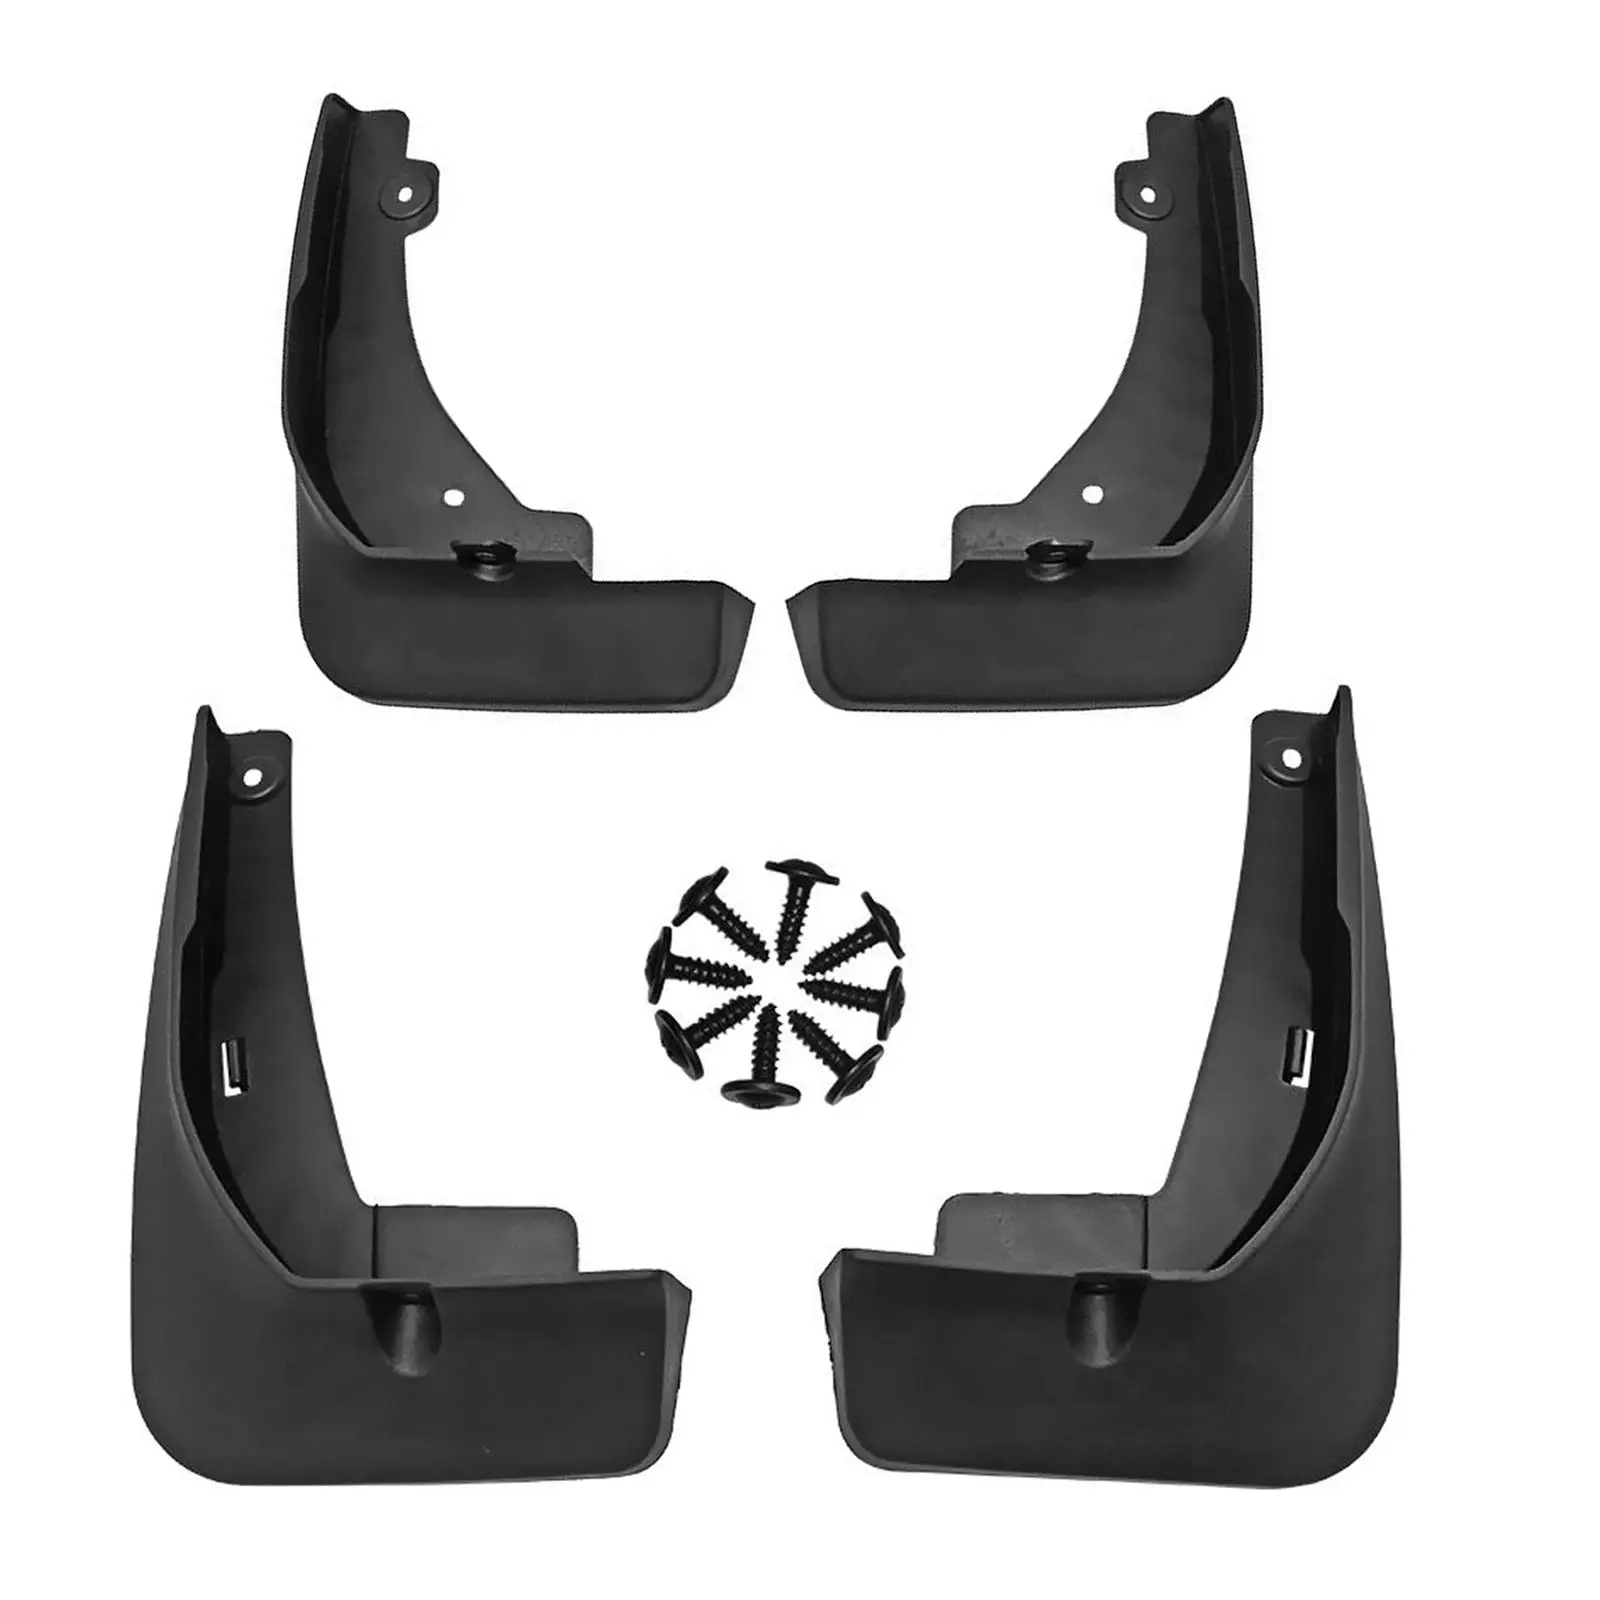 4x Car Mud Flaps Car Accessories Protection Spare Parts Premium Mudflaps for Toyota Corolla Cross No Drilling Required